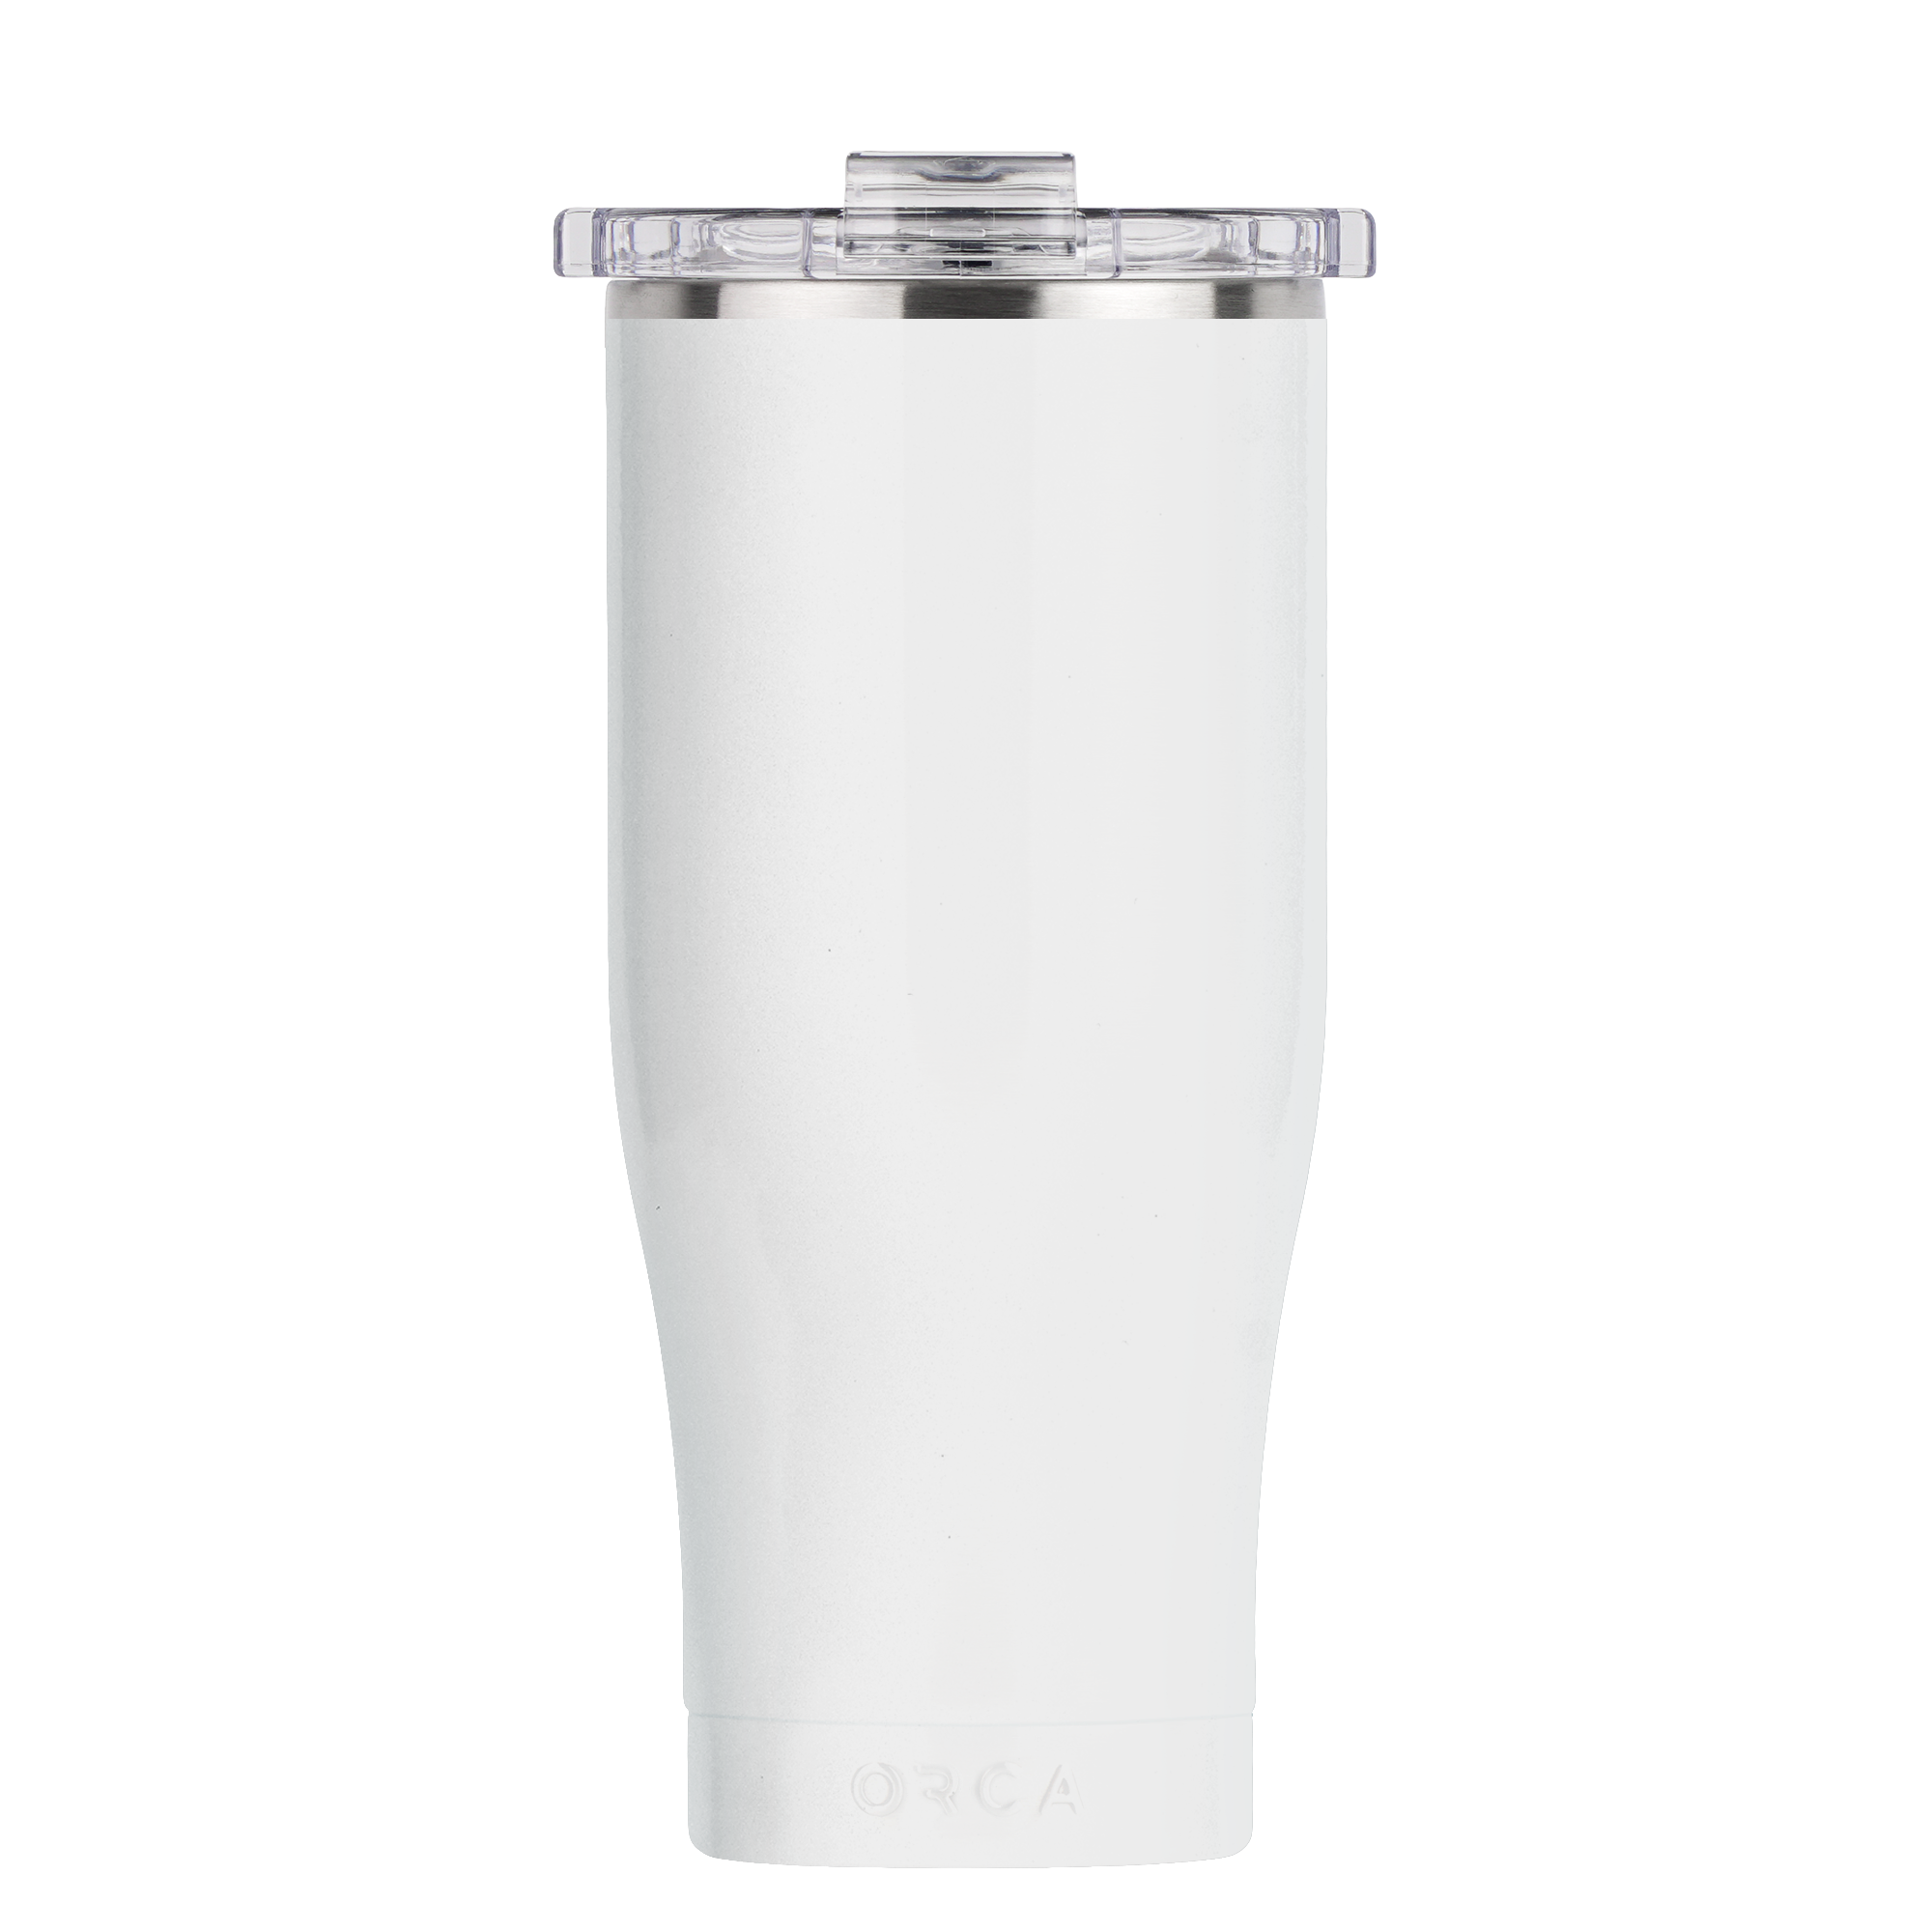 16 oz Stainless Steel Thermal Tumbler - White - Orca